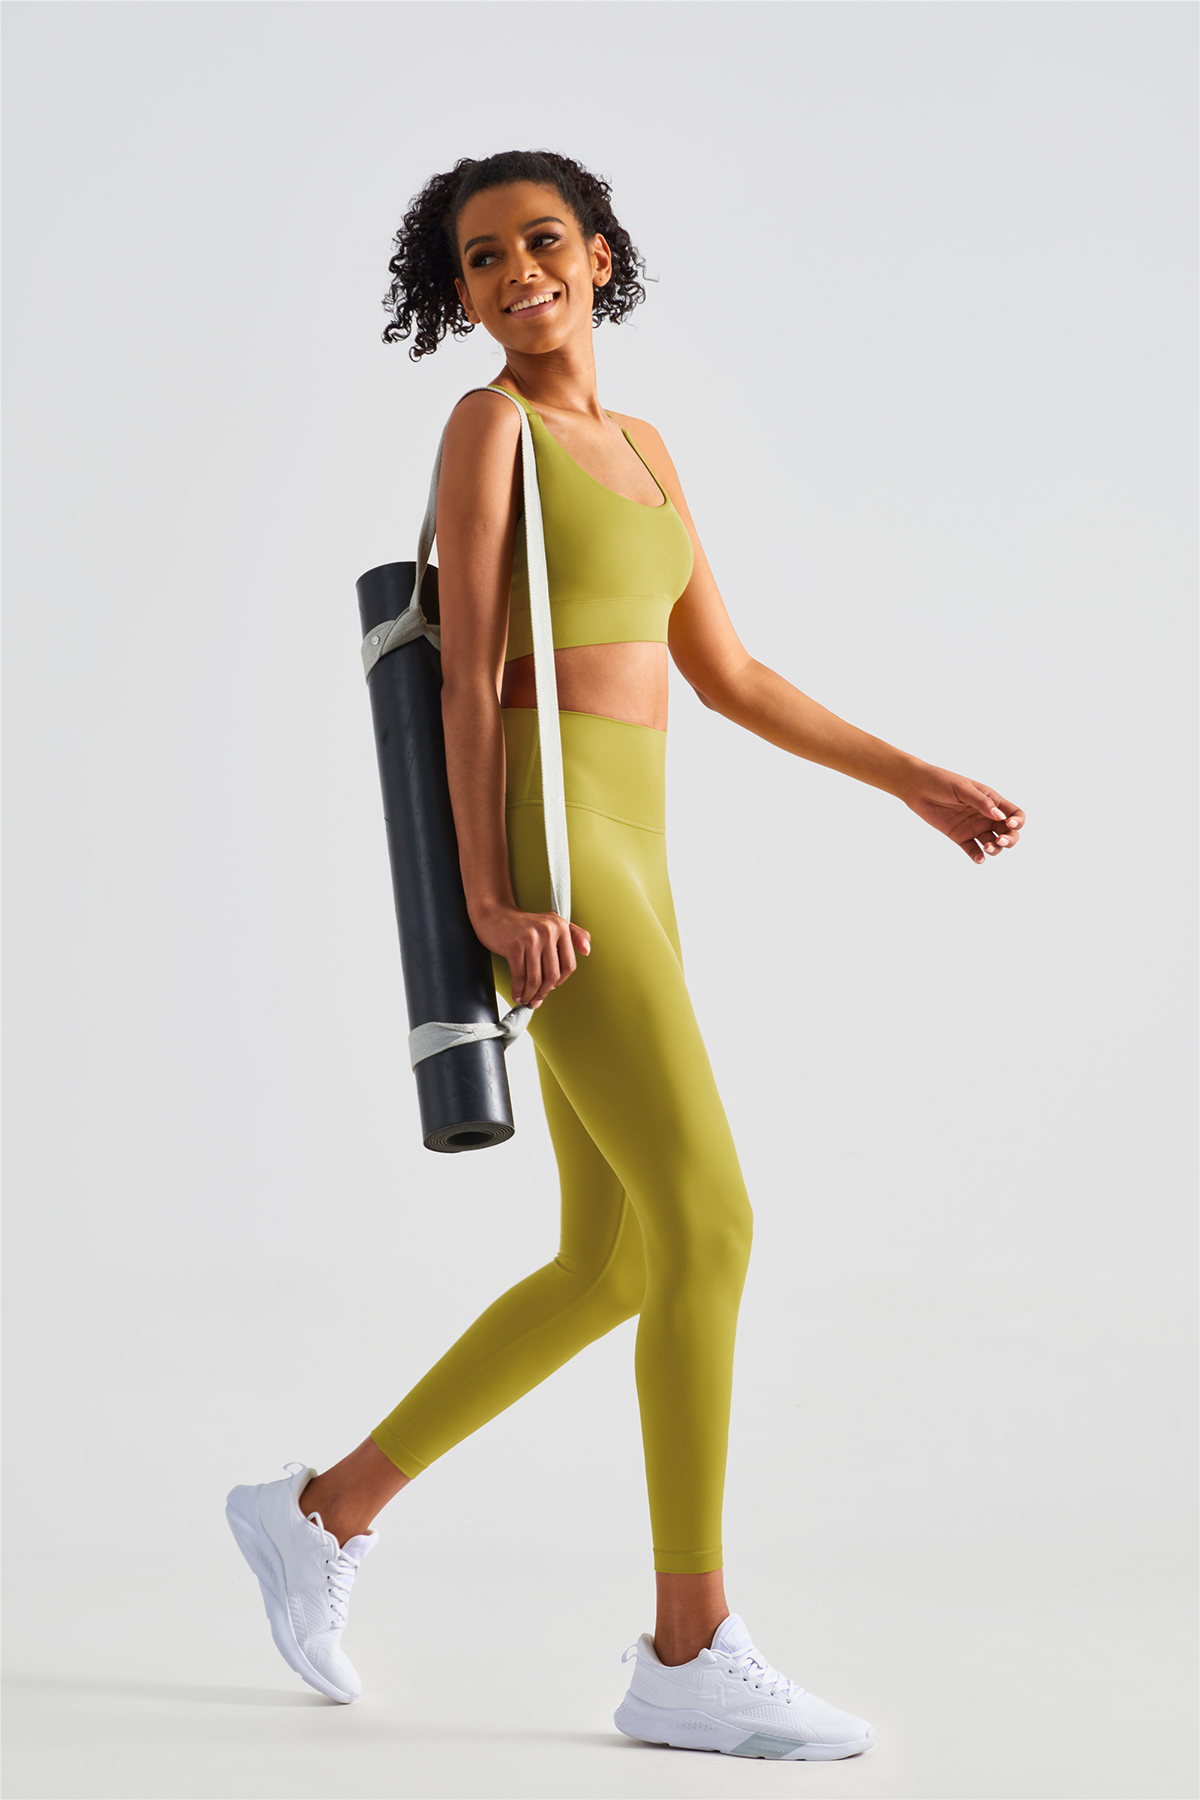 Hergymclothing yellow active wear for ladies online shopping